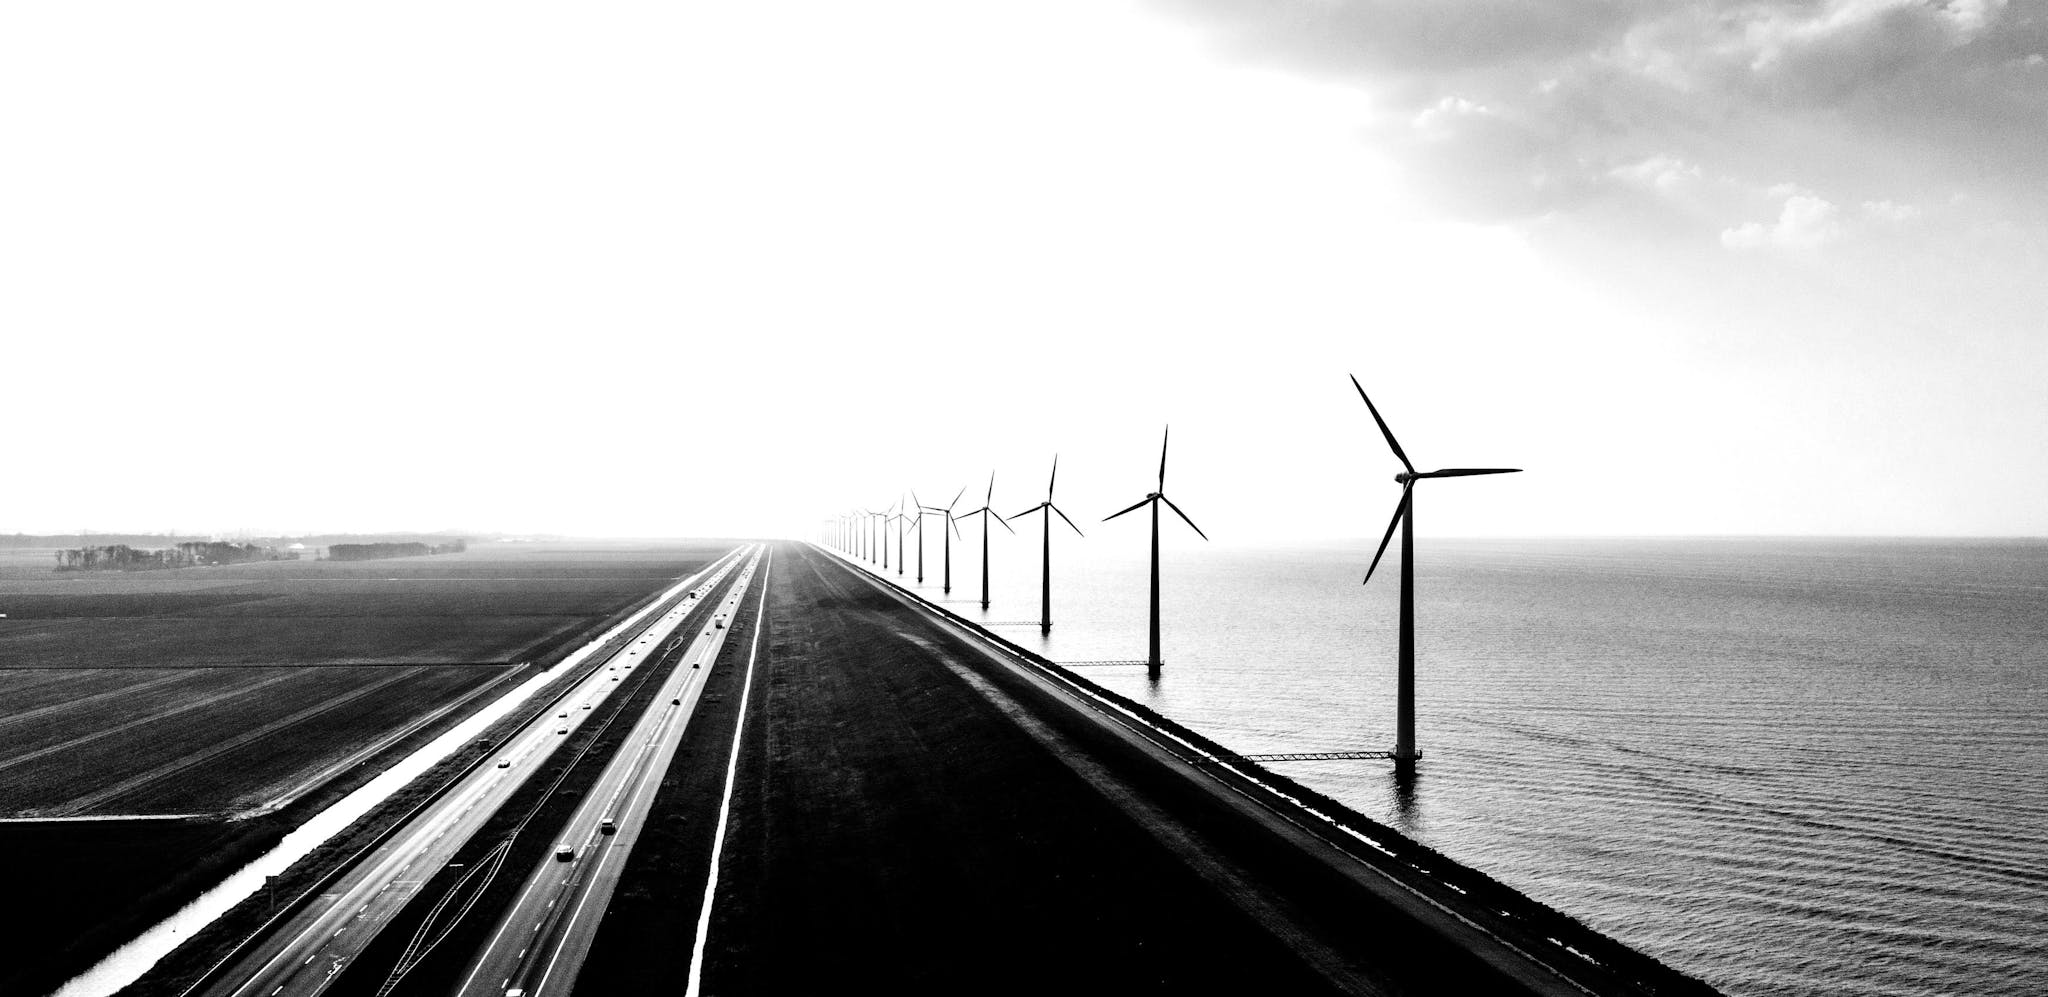 A waterside road in Europe with wind turbines running along side